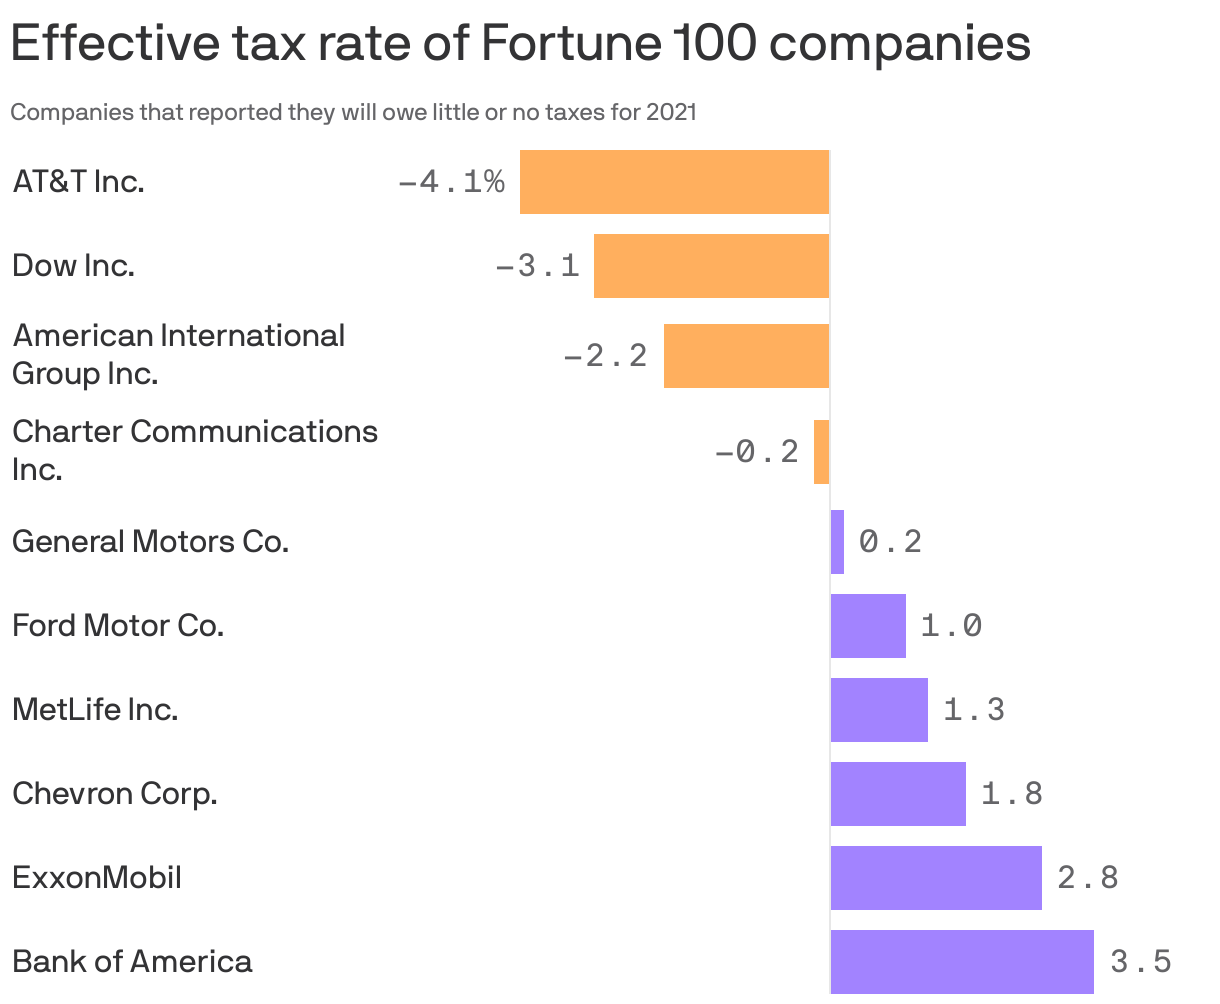 Effective tax rate of Fortune 100 companies 